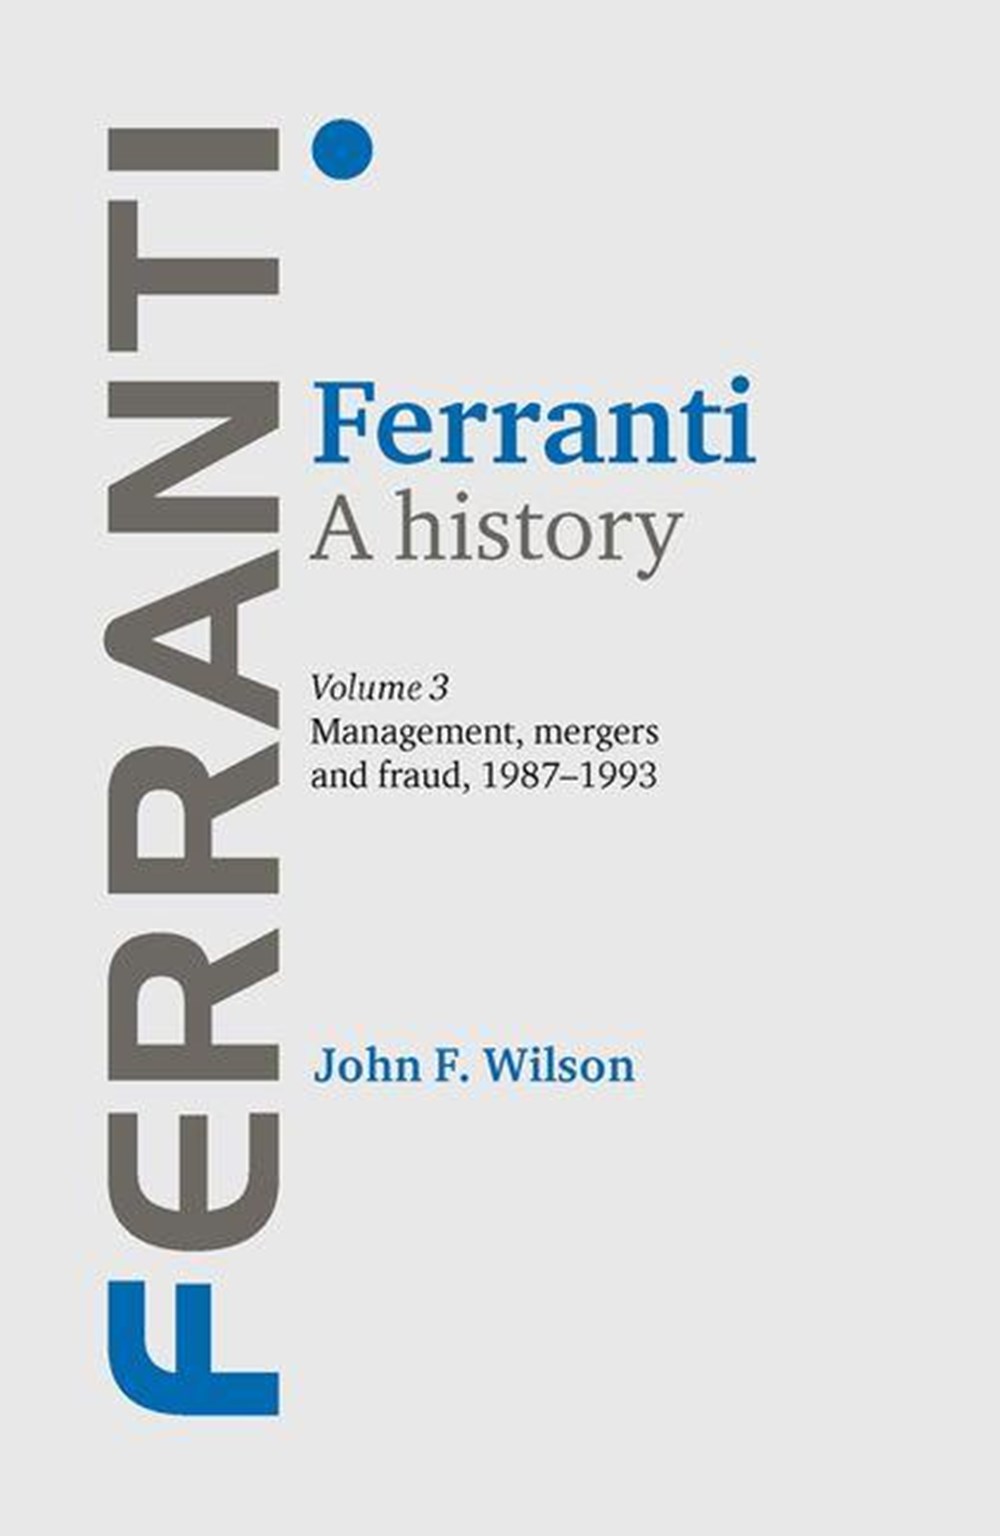 Ferranti A History, Volume 3: Management, Mergers and Fraud 1987-1993